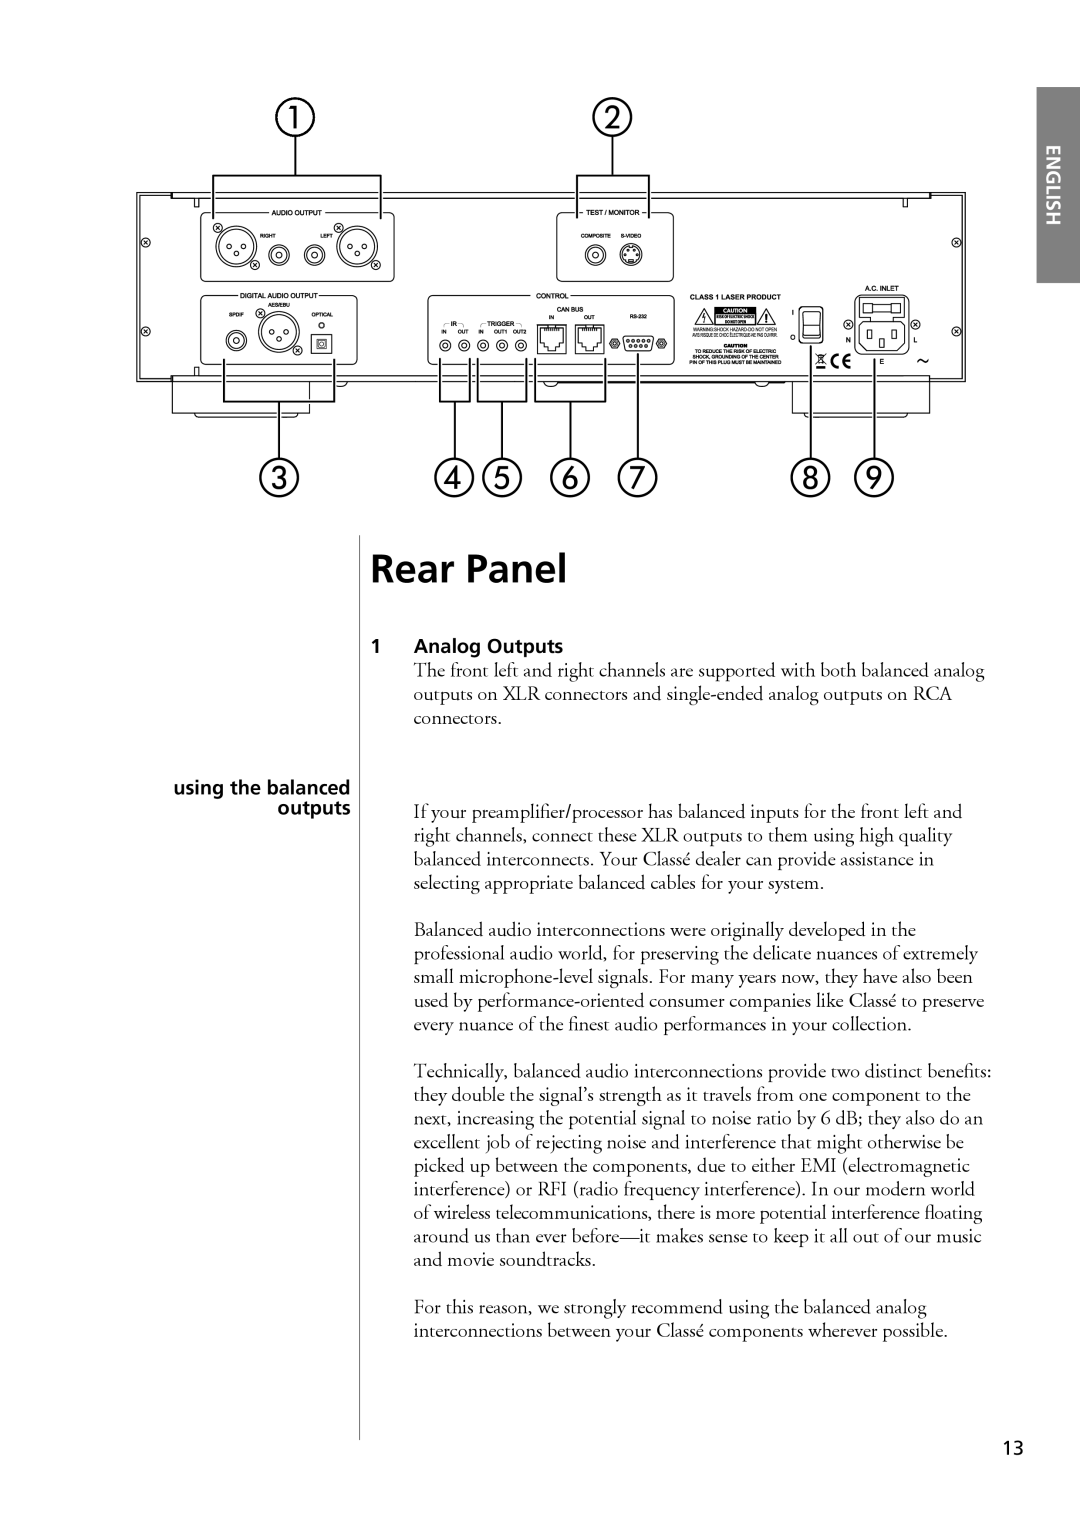 Classe Audio CDP-102 owner manual Rear Panel, English, 1Analog Outputs 